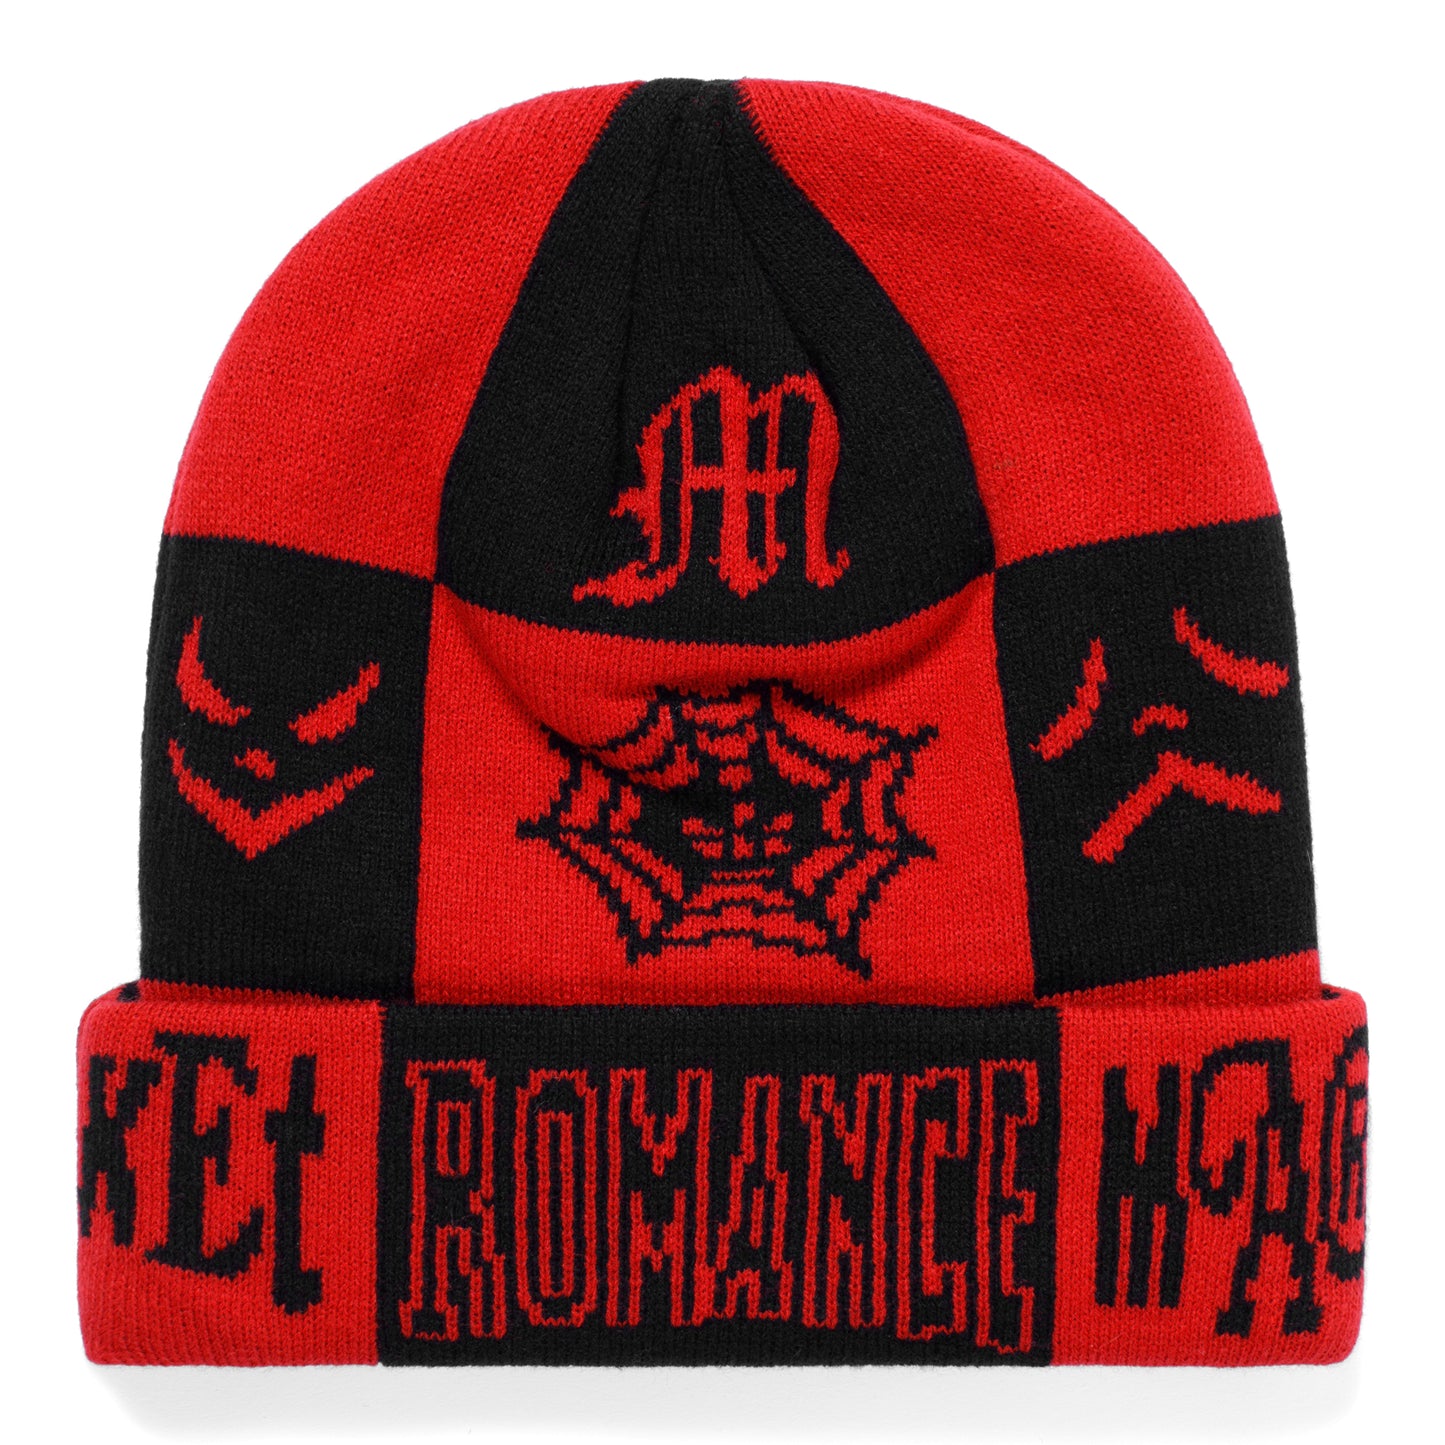 MARKET clothing brand MCR CHECKERED SPIDER WEB BEANIE. Find more graphic tees, hats, beanies, hoodies at MarketStudios.com. Formally Chinatown Market. 